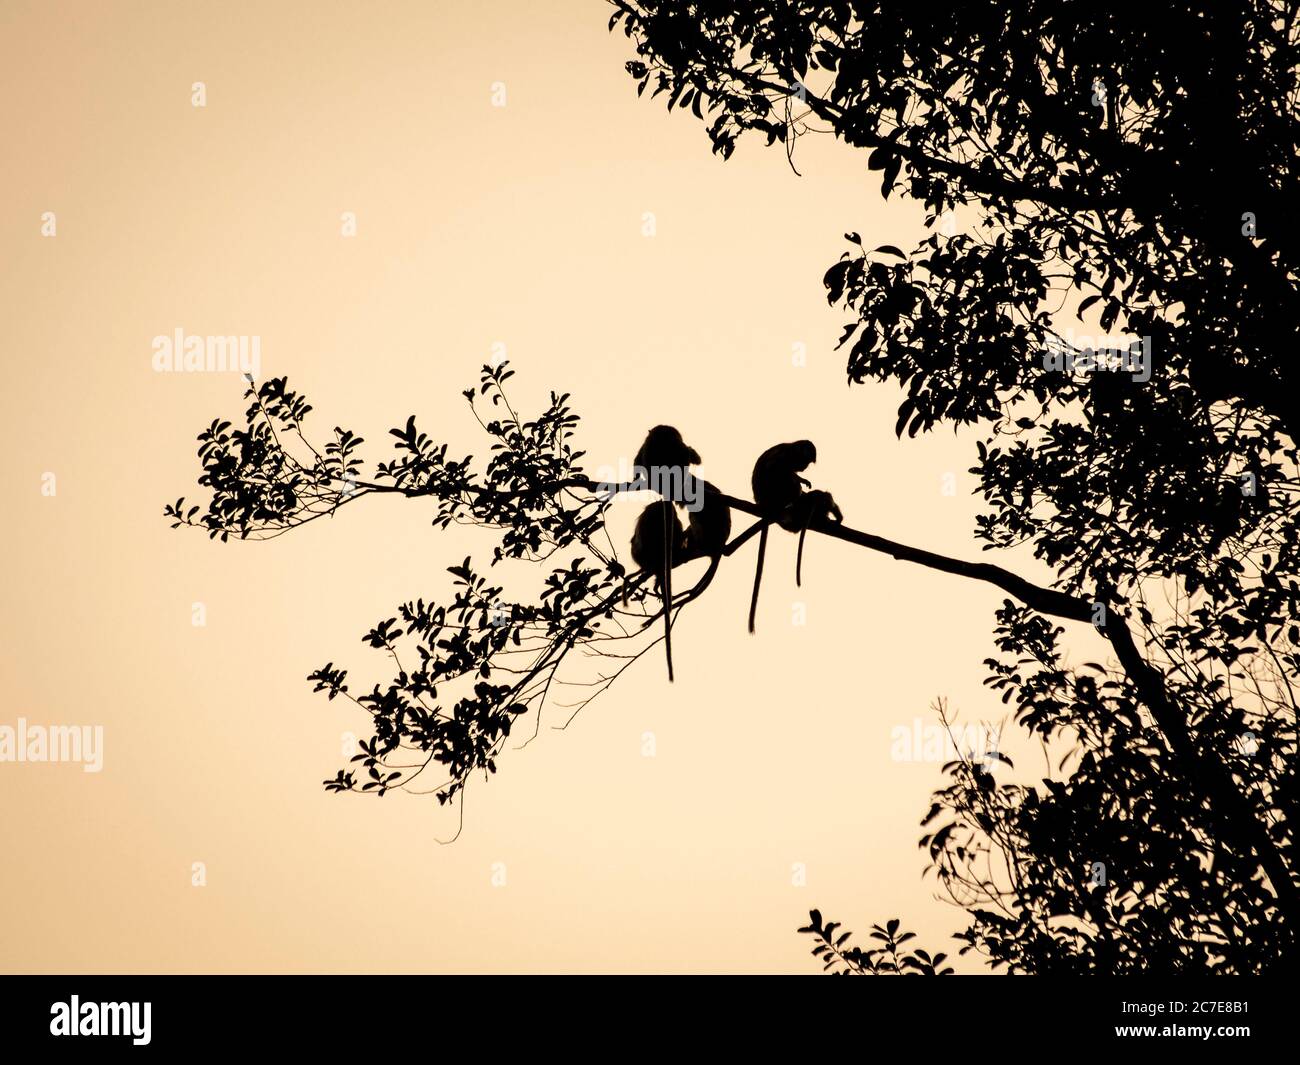 Long tailed macaques silhouetted sitting on a branch at sunset Stock Photo